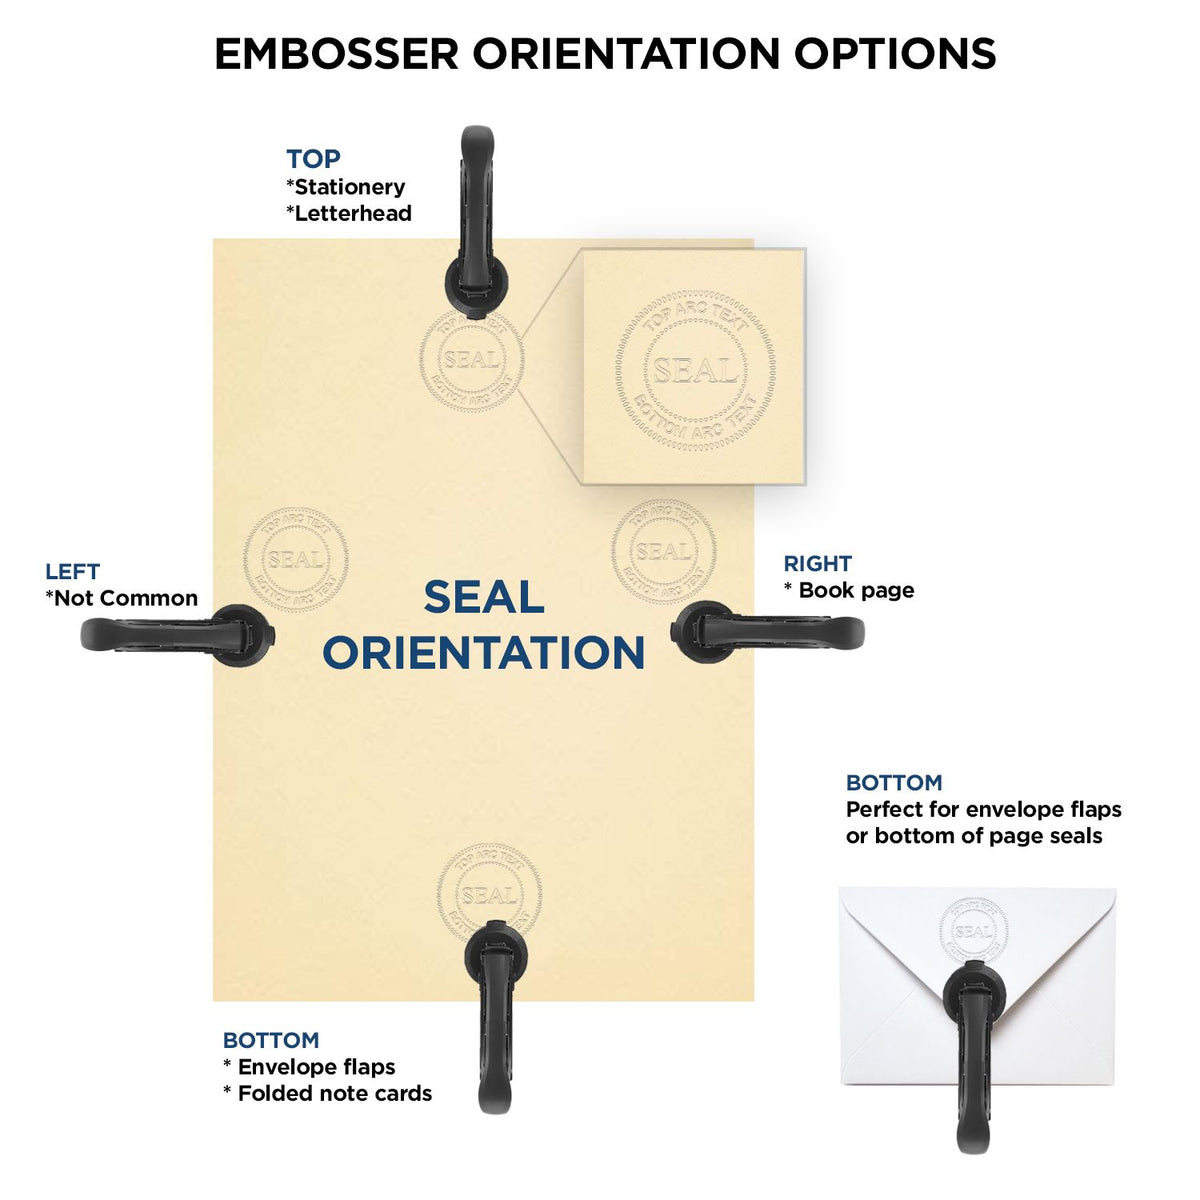 An infographic for the Extended Long Reach Maryland Surveyor Embosser showing embosser orientation, this is showing examples of a top, bottom, right and left insert.